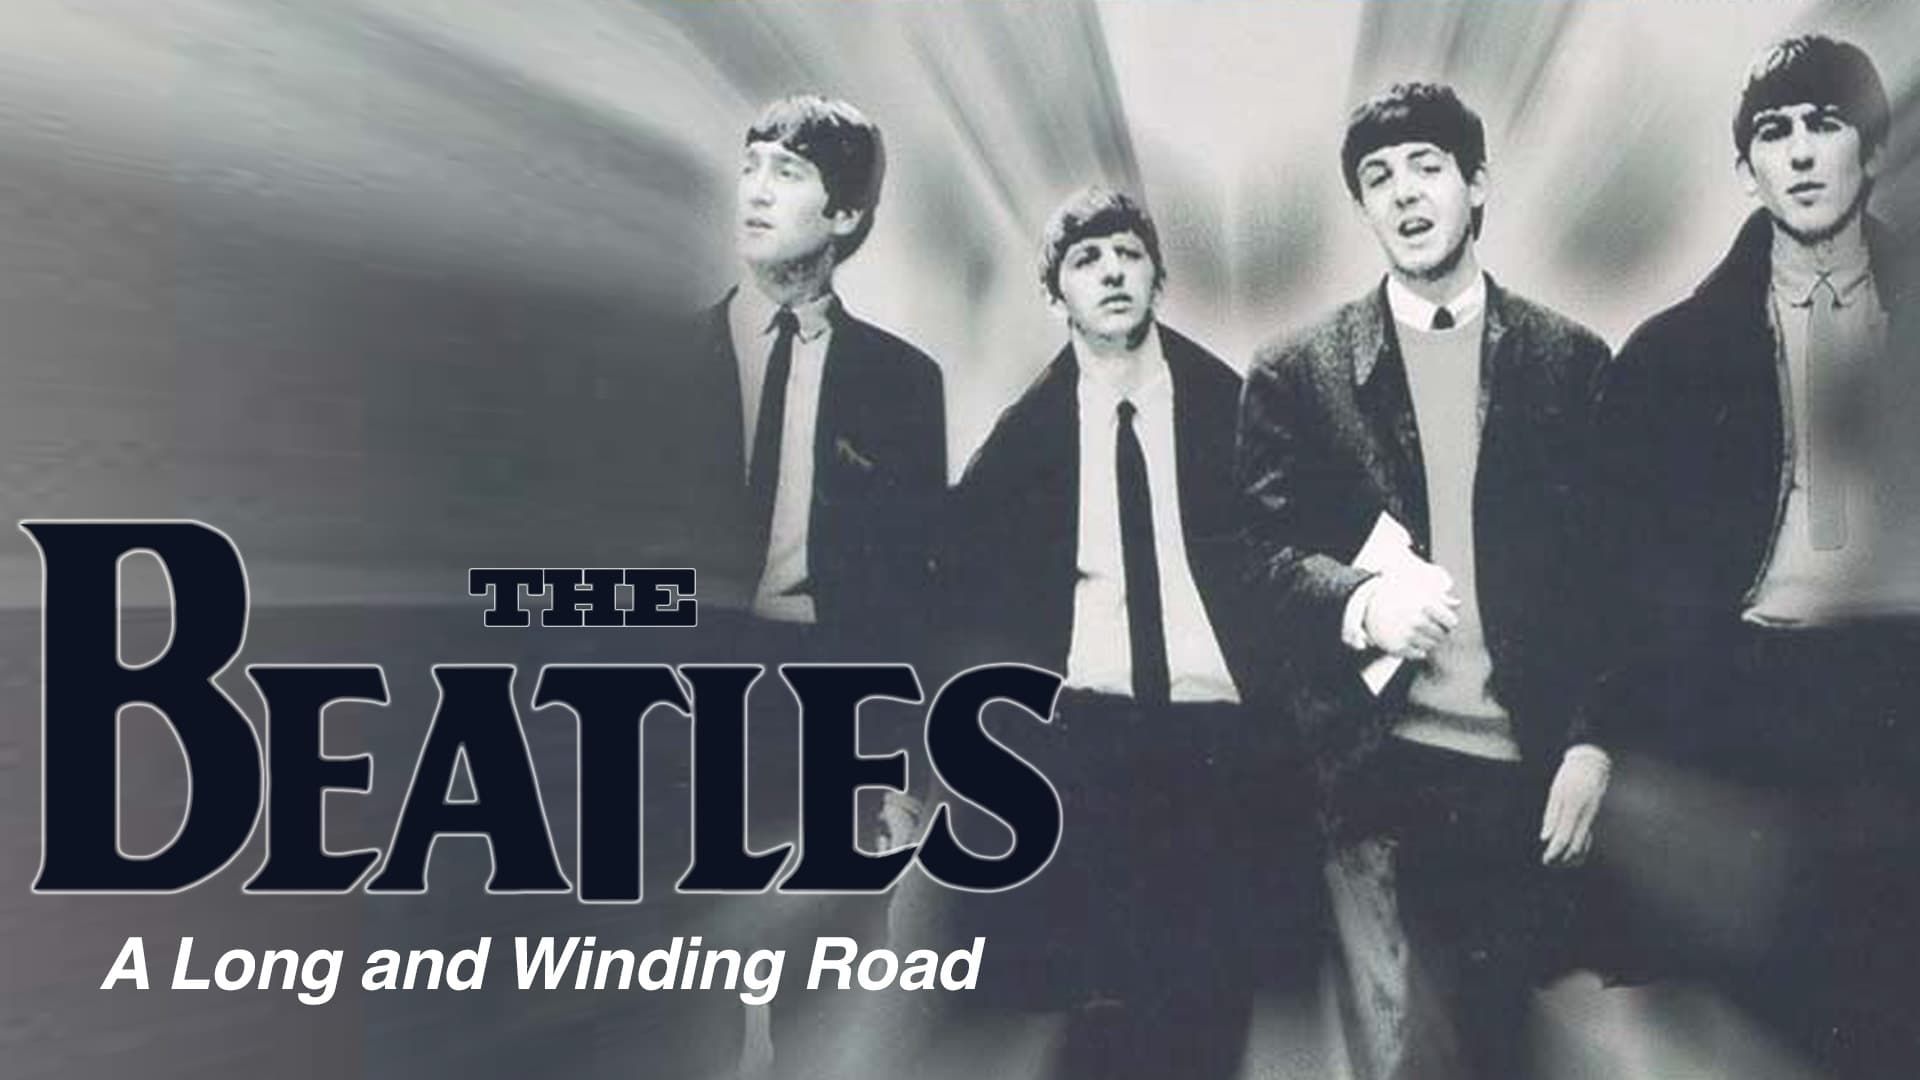 The Beatles, The Long and Winding Road: The Life and Times background